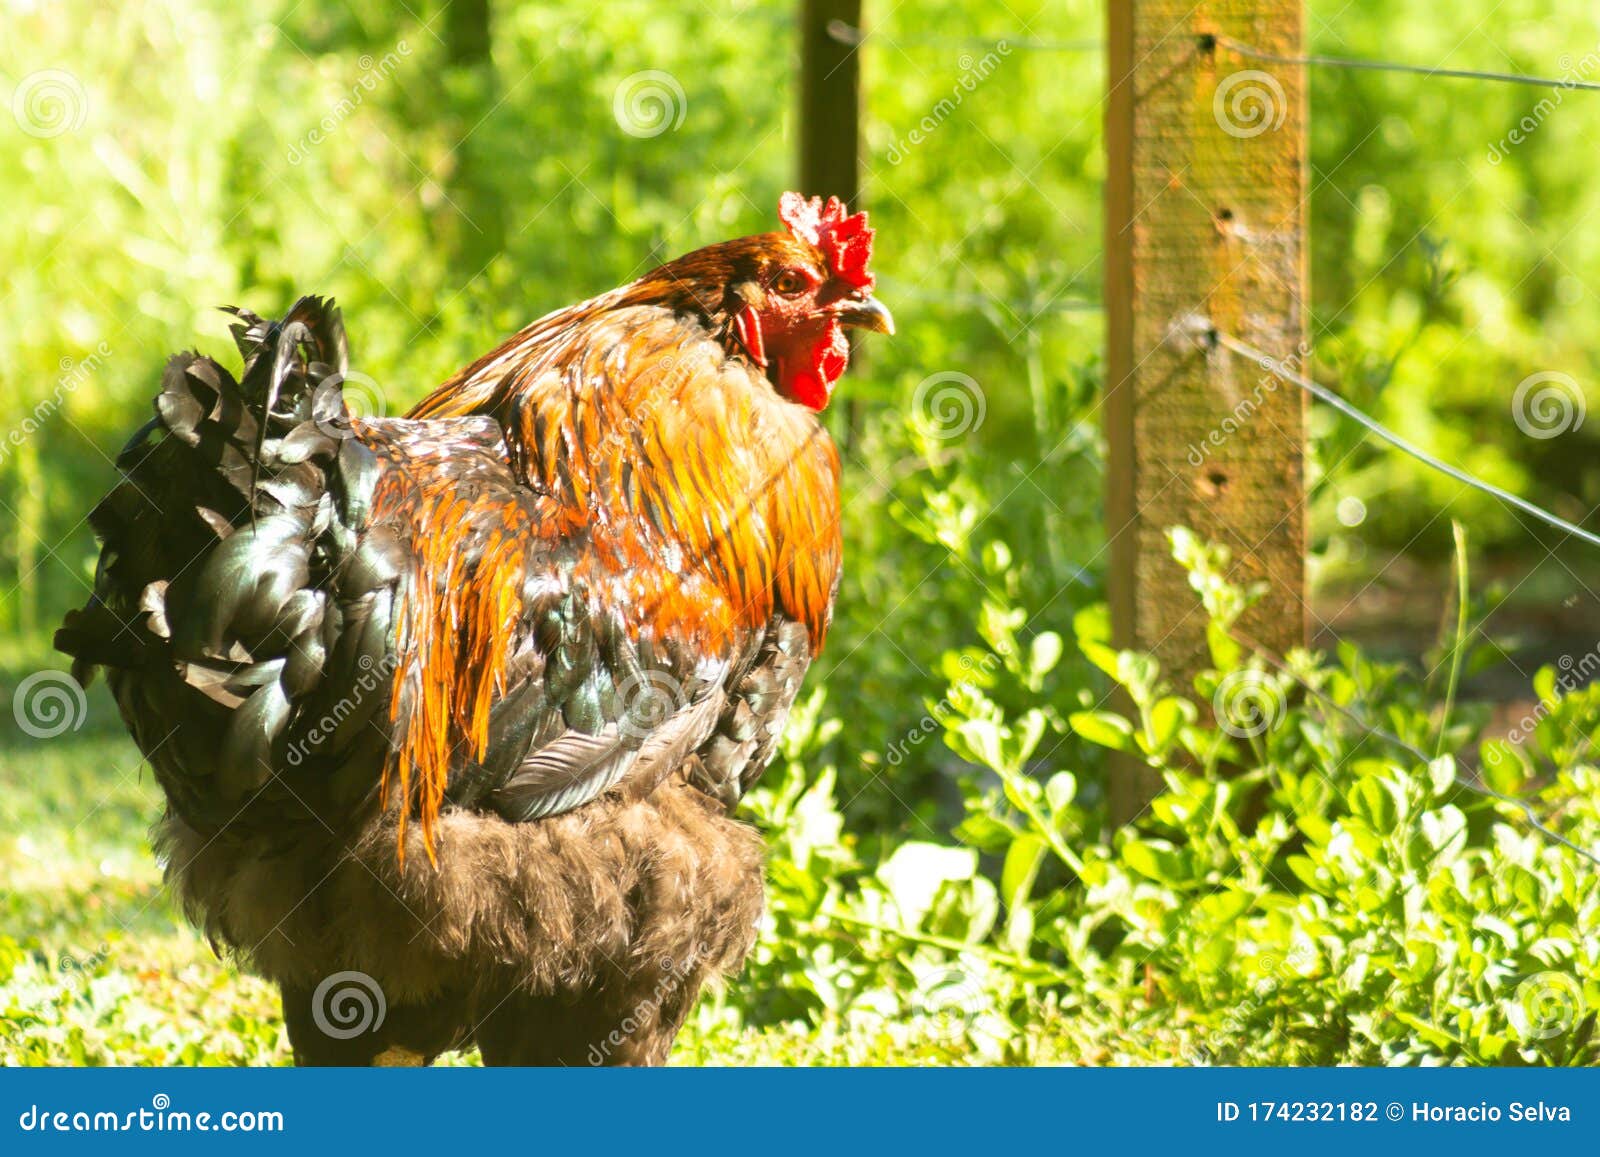 Domestic Chickens in the Corral. Omnivorous Animals with Two Legs. Live  Birds Stock Photo - Image of medium, food: 174232182